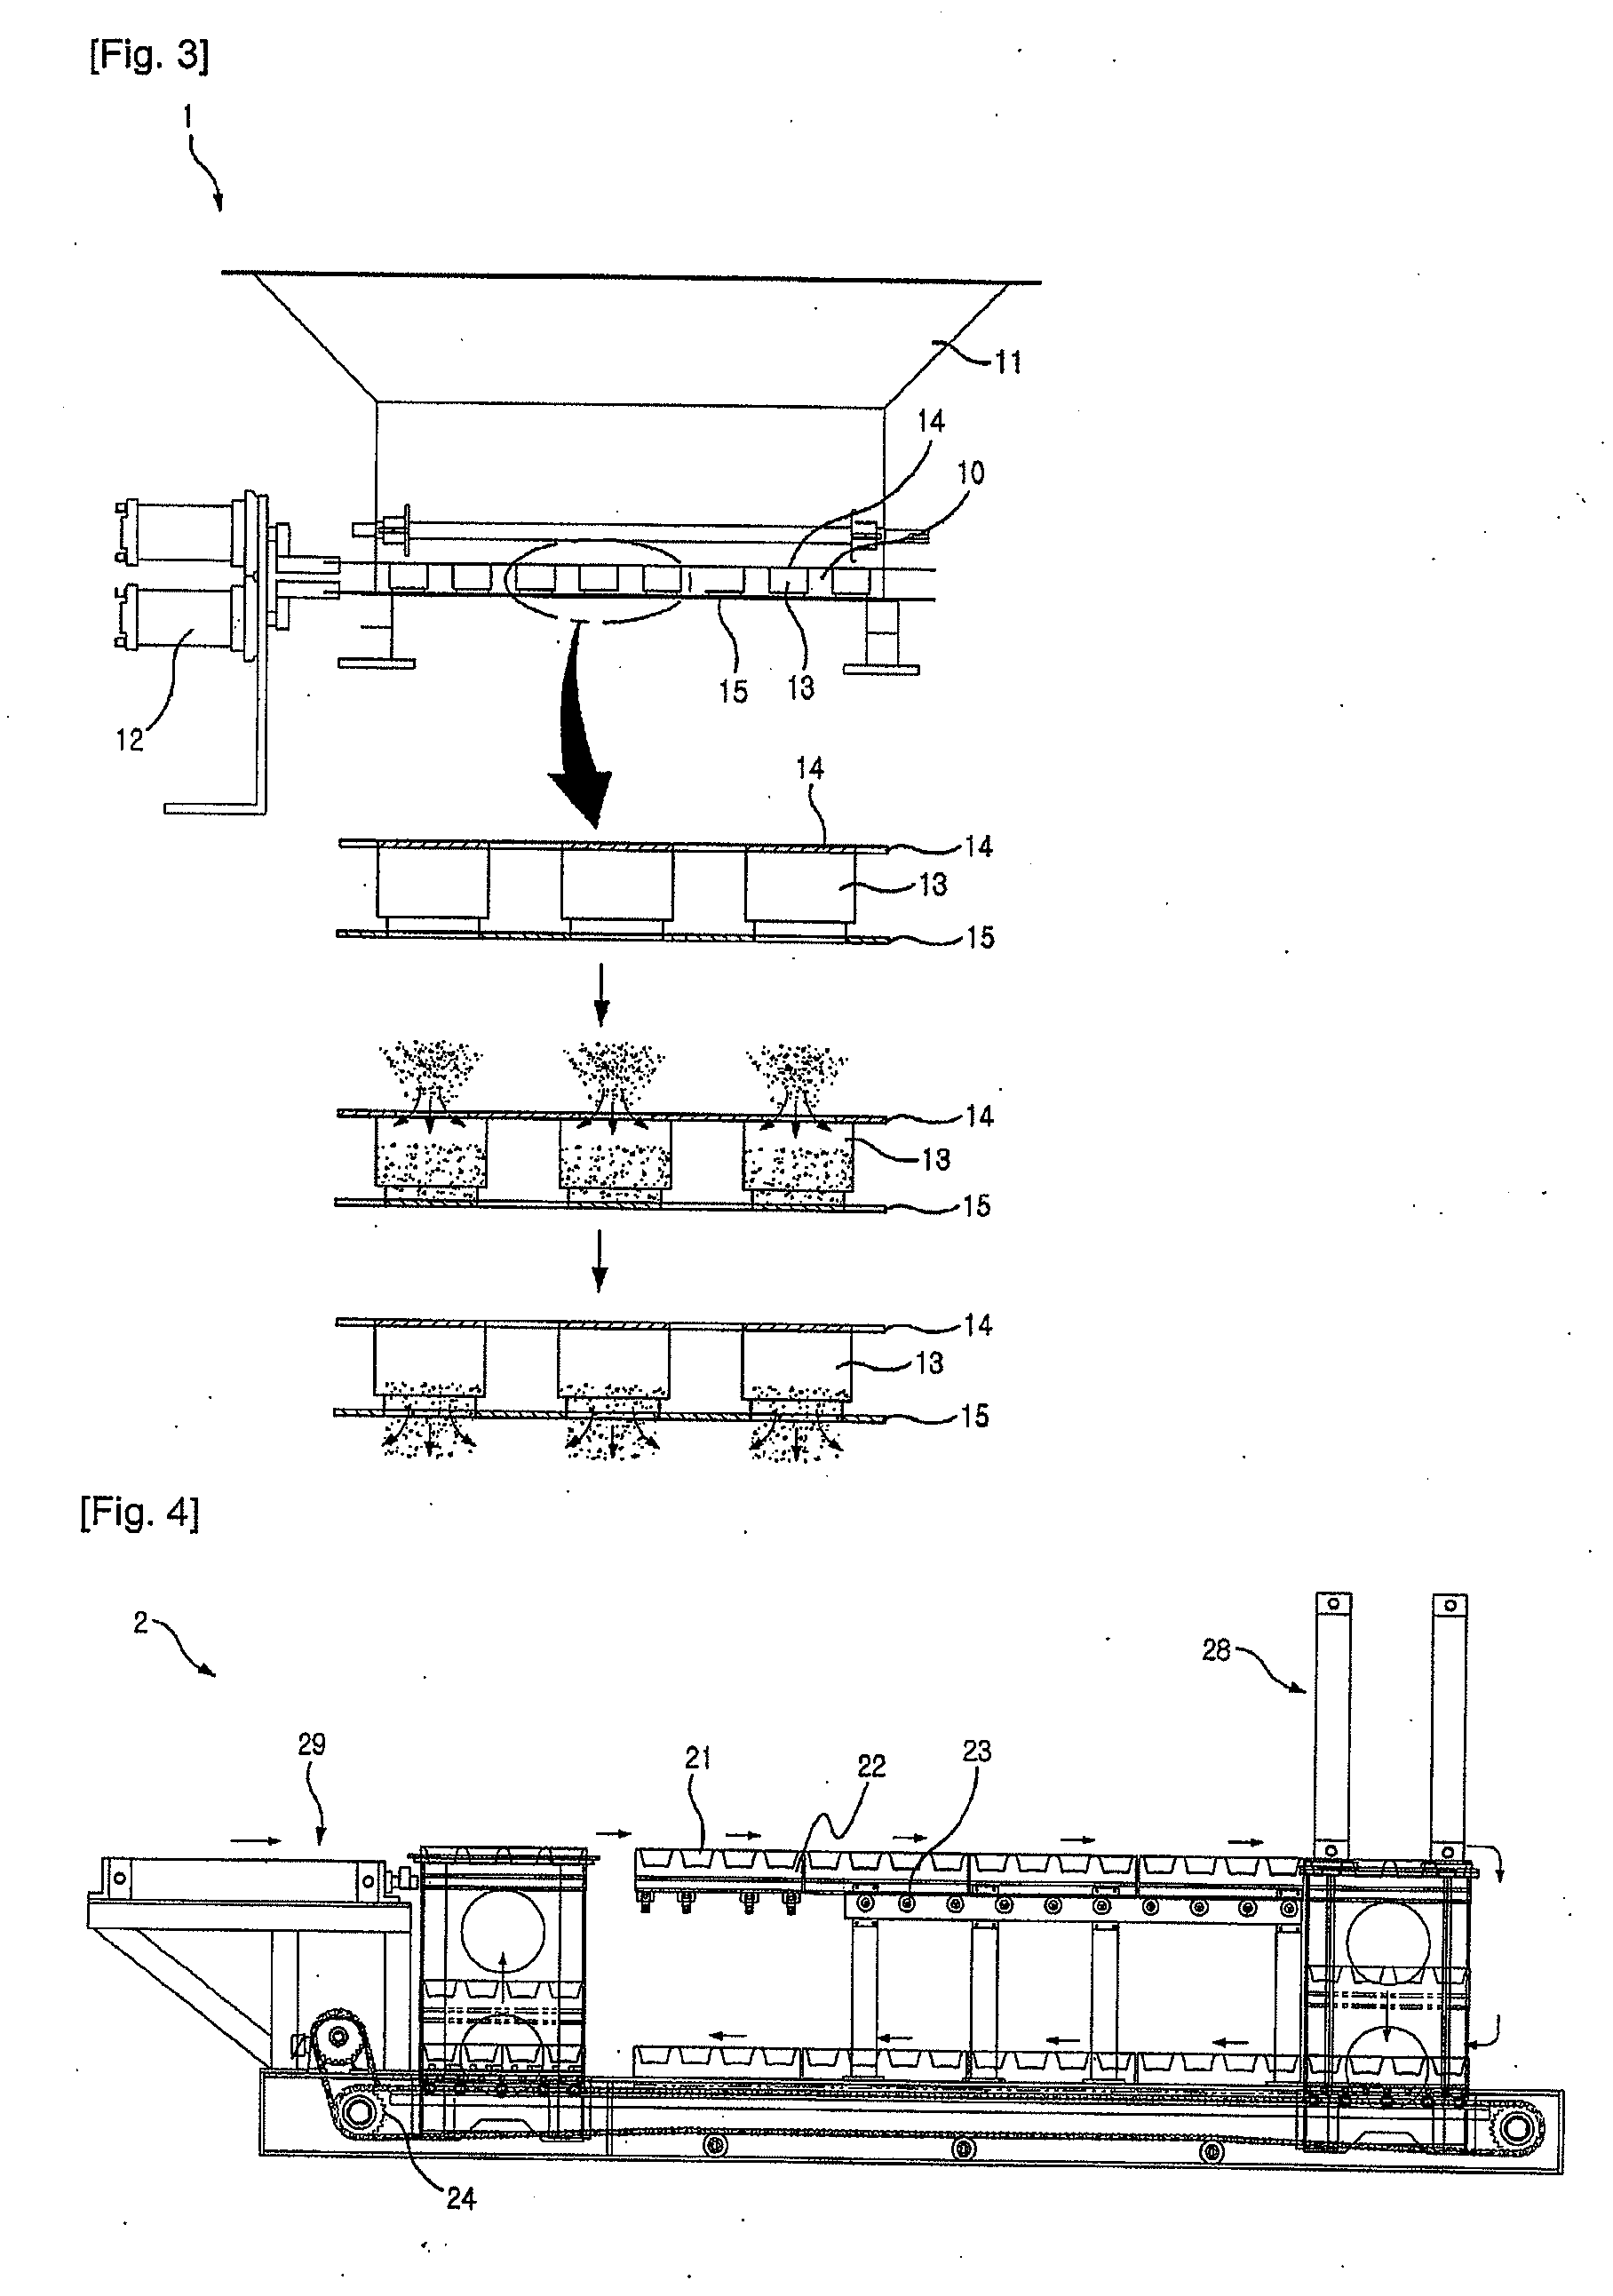 Apparatus and method for fabricating molded container using compression molding machine